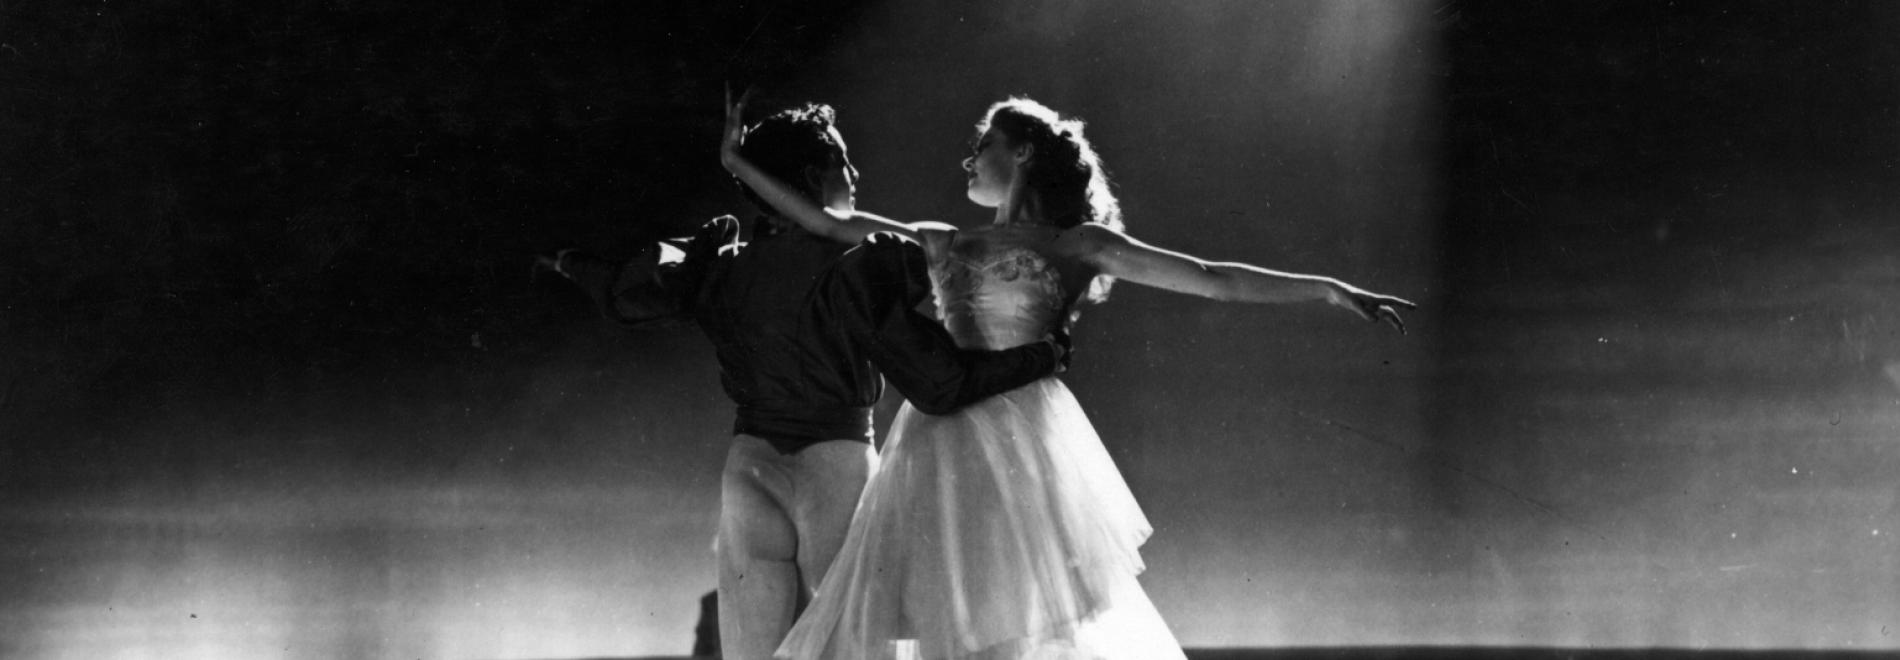 The Red Shoes (Michael Powell, Emeric Pressburger, 1948)